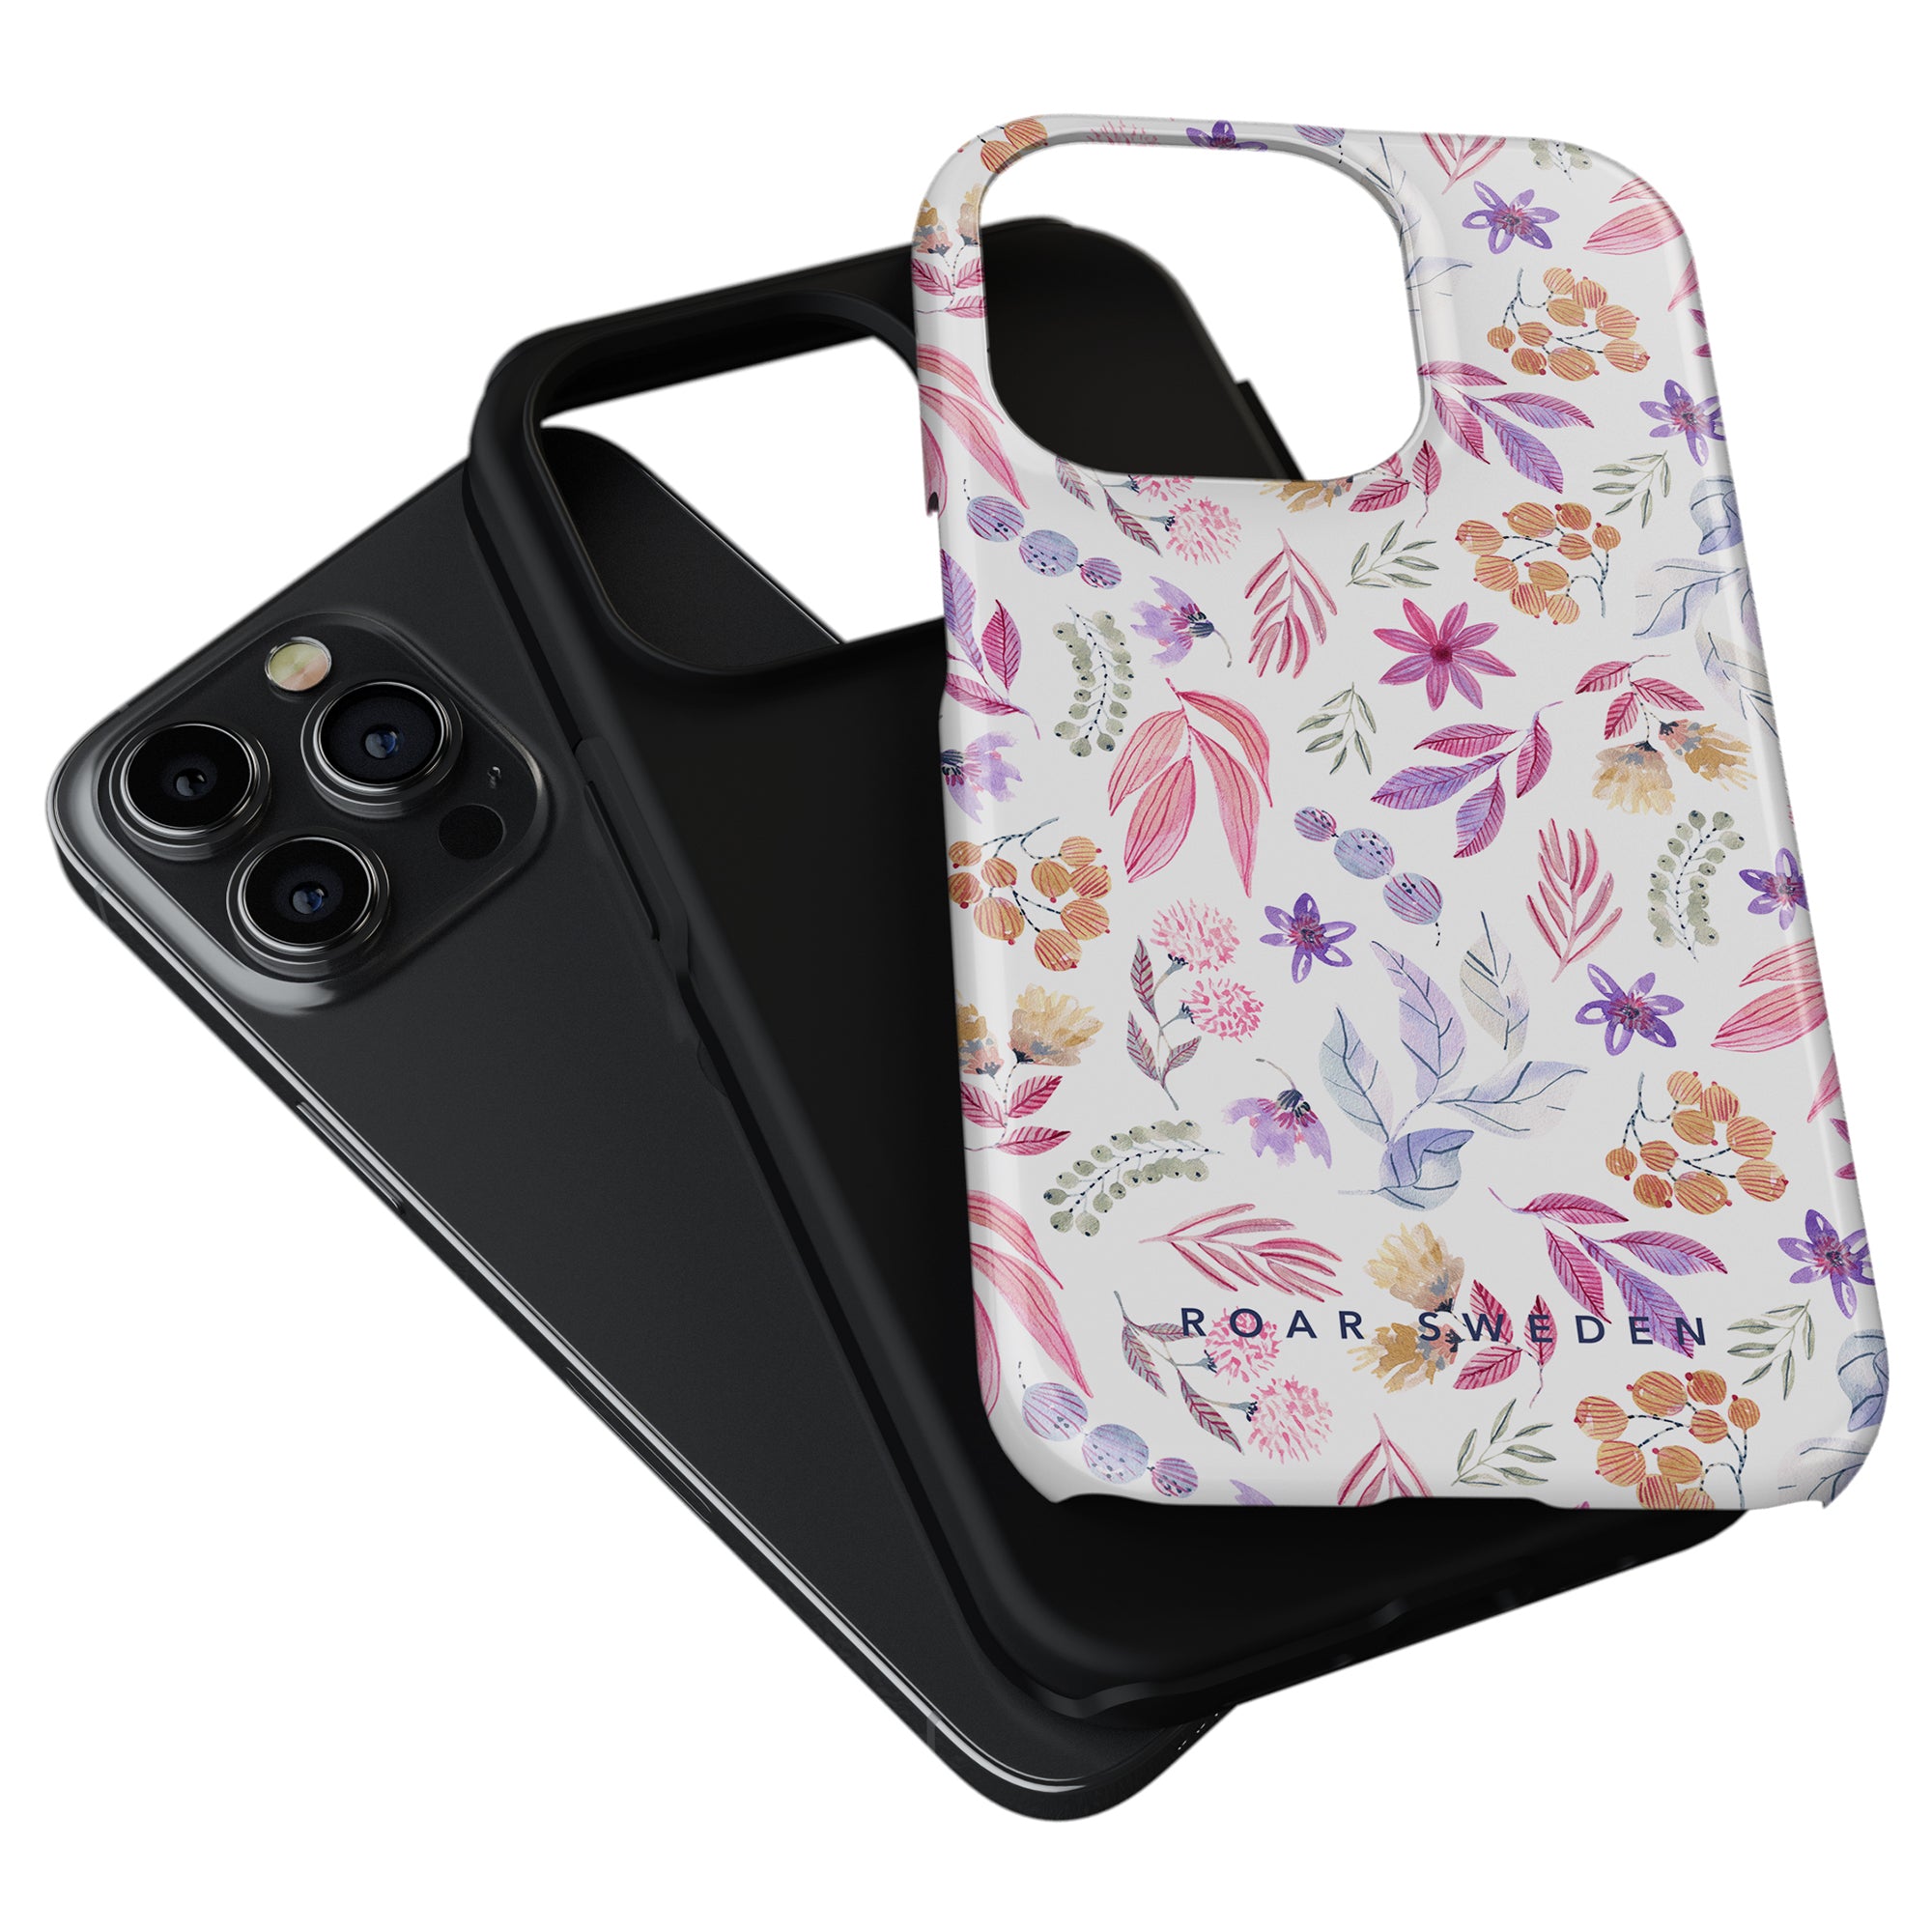 Two smartphone cases are shown: one black and one from the Floral Collection with a vibrant design. The floral case features the text "ROAR SWEDEN" at the bottom. Both cases, including the Flower Power - Tough Case, offer maximalt skydd for phones with triple rear cameras.